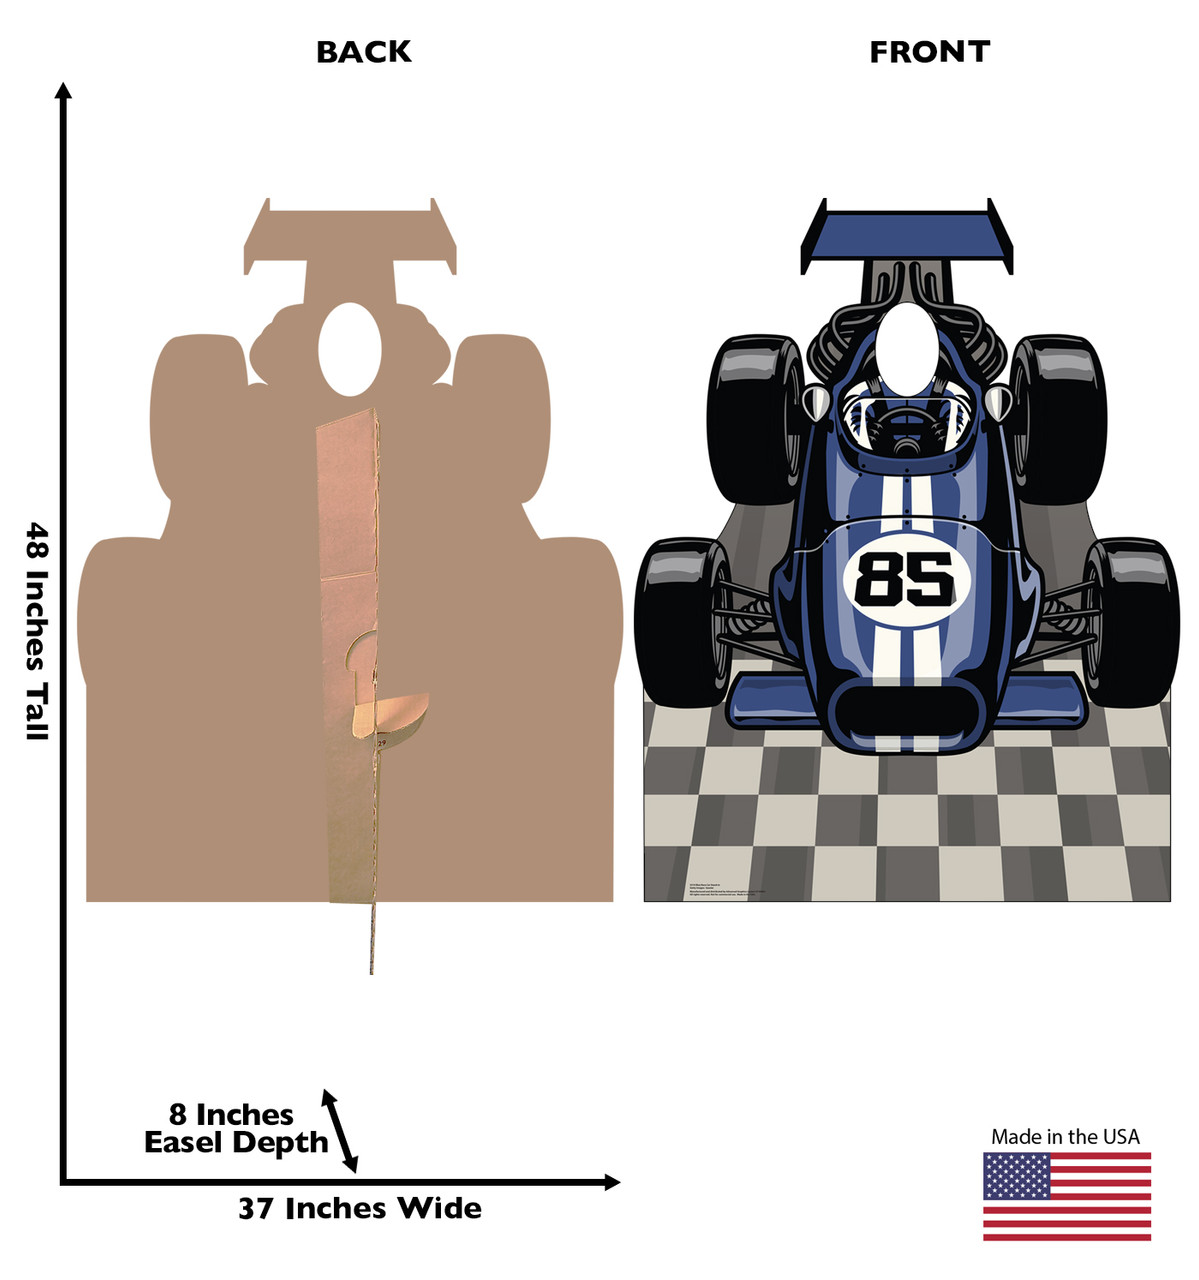 Life-size cardboard standee of a Blue Race Car Standin with back and front dimensions.